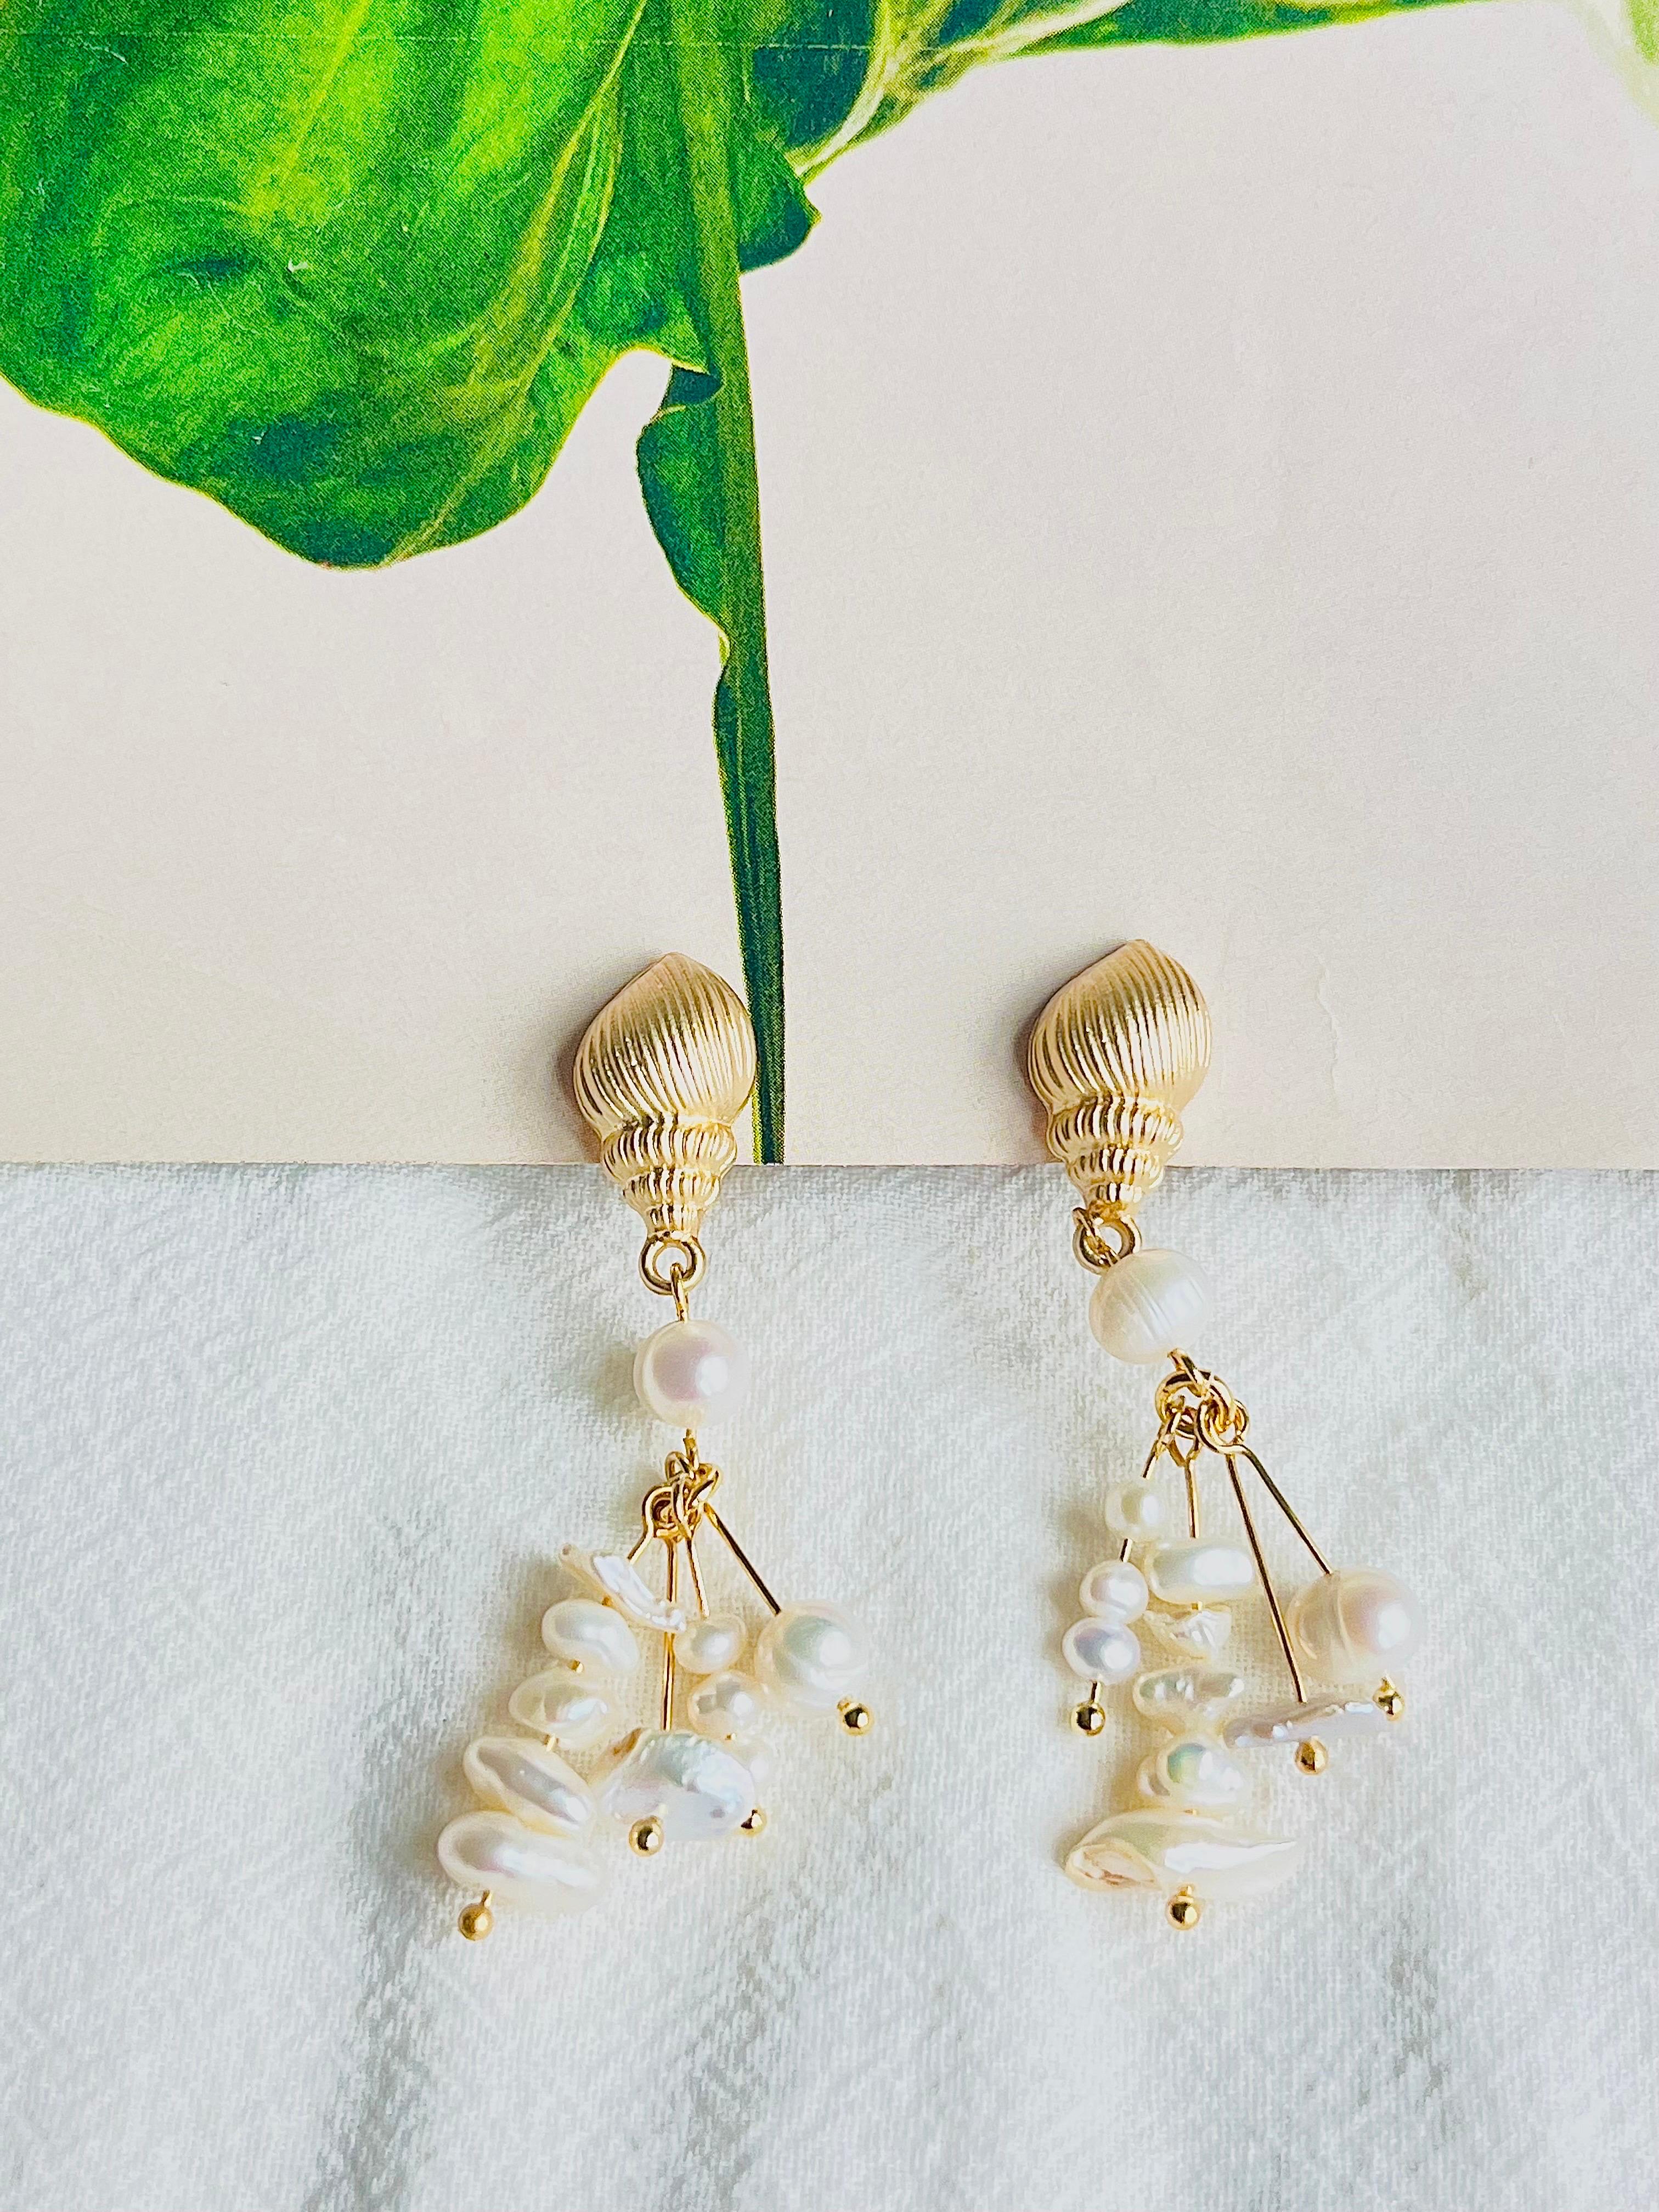 Natural White Irregular Cluster Pearls Tassel Conch Shell Pierced Earrings, Gold Tone, Swarovski Element

100% handmade. Each one is different. Excellent gift for lady. Very high cost and quality.

Material: Natural pearls, Gold plated metal.

Size: